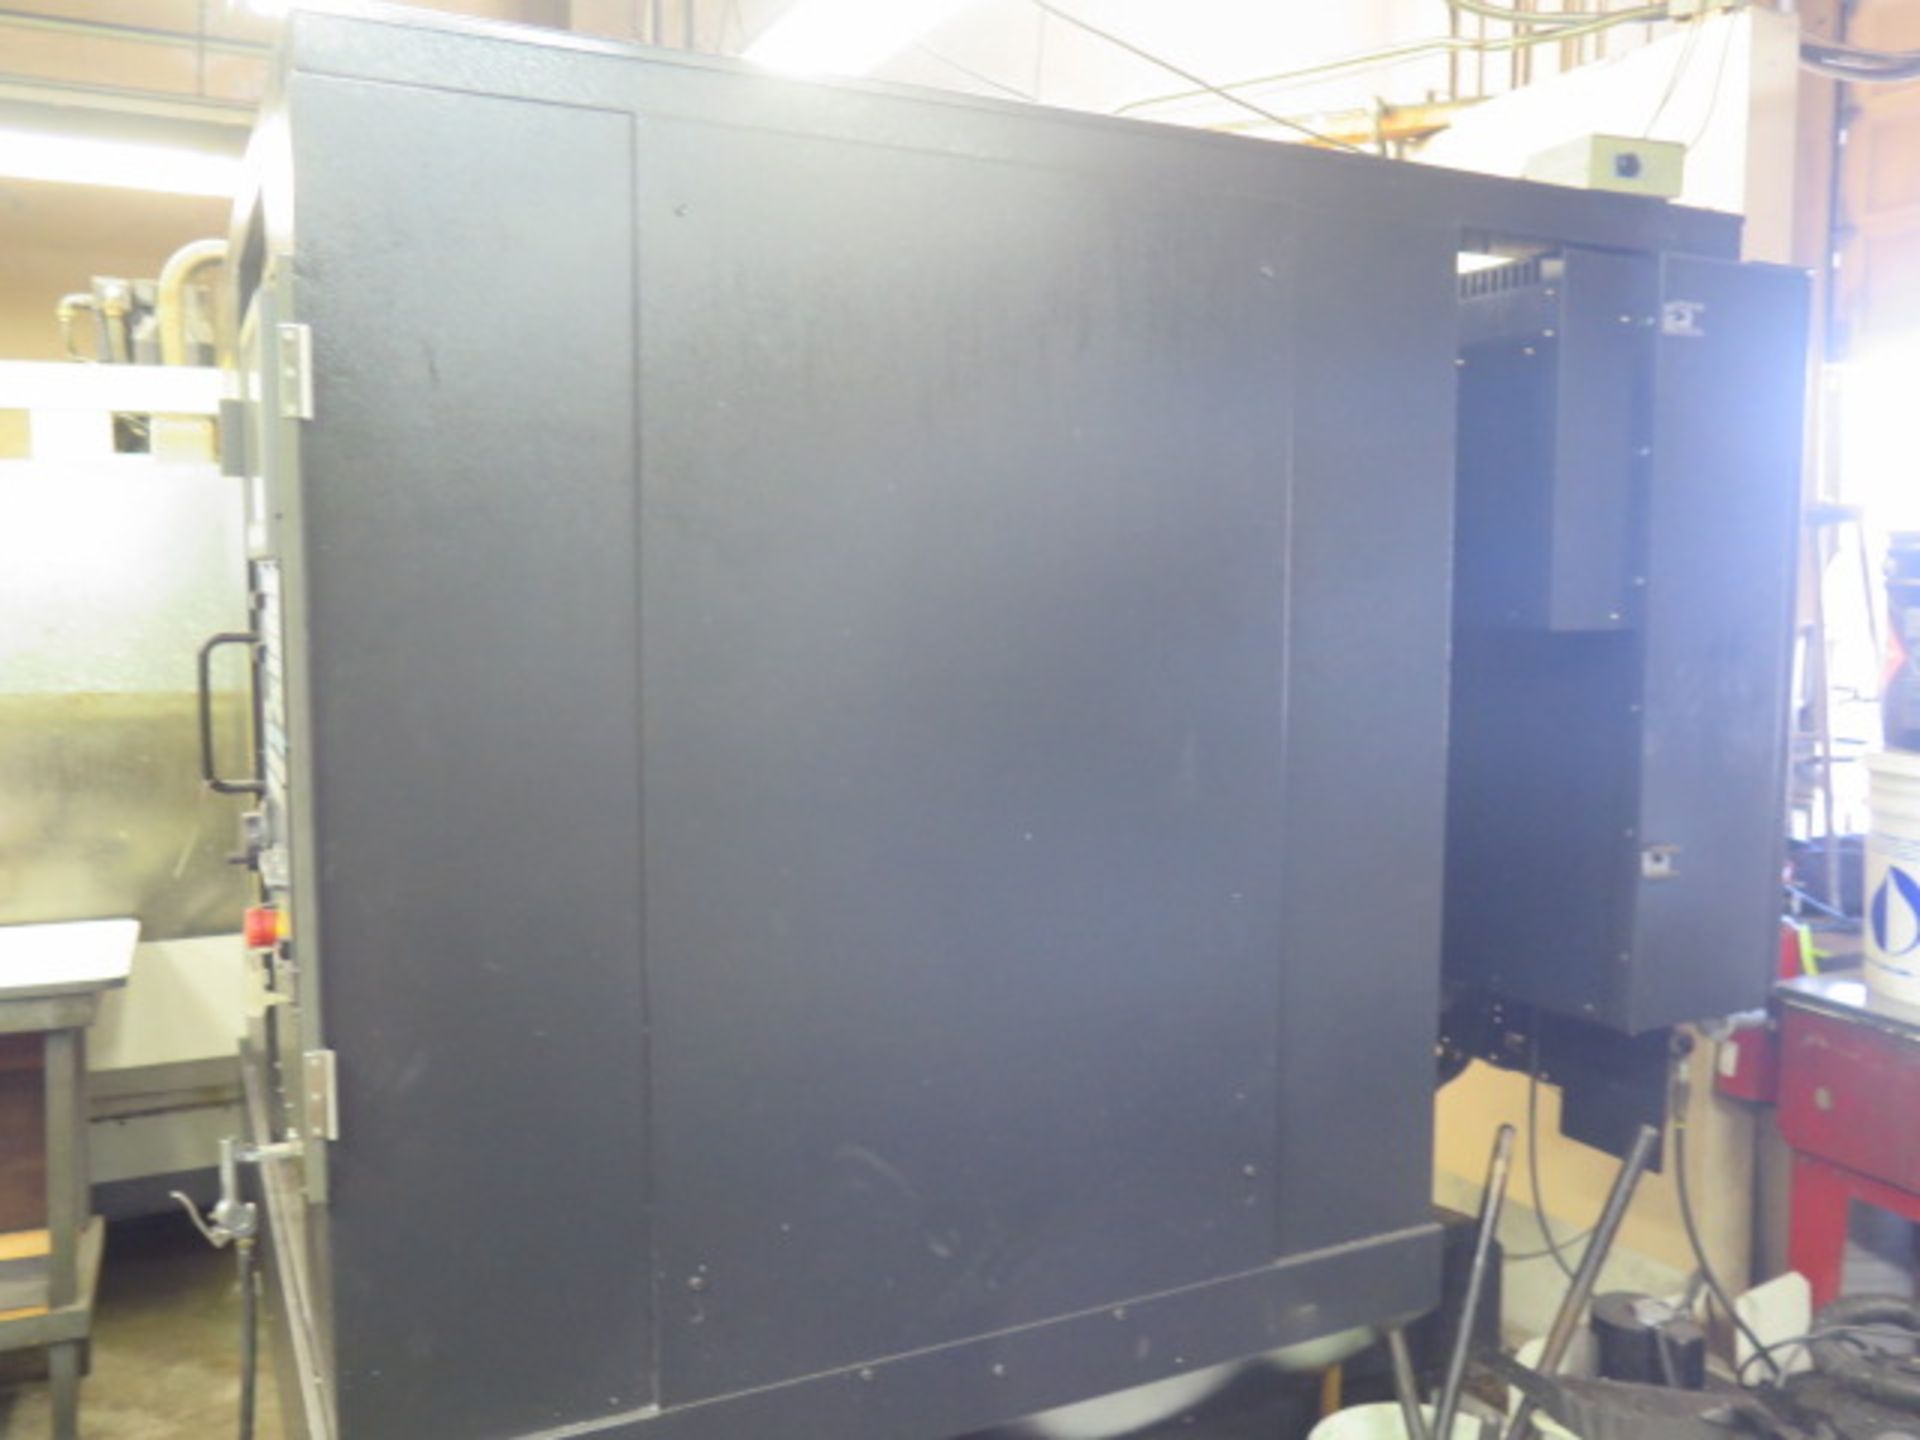 2006 Fanuc Robodrill MATE CNC Drill and Tapping Center s/n P068VN040 w/ Fanuc 0i-MC, SOLD AS IS - Image 10 of 13